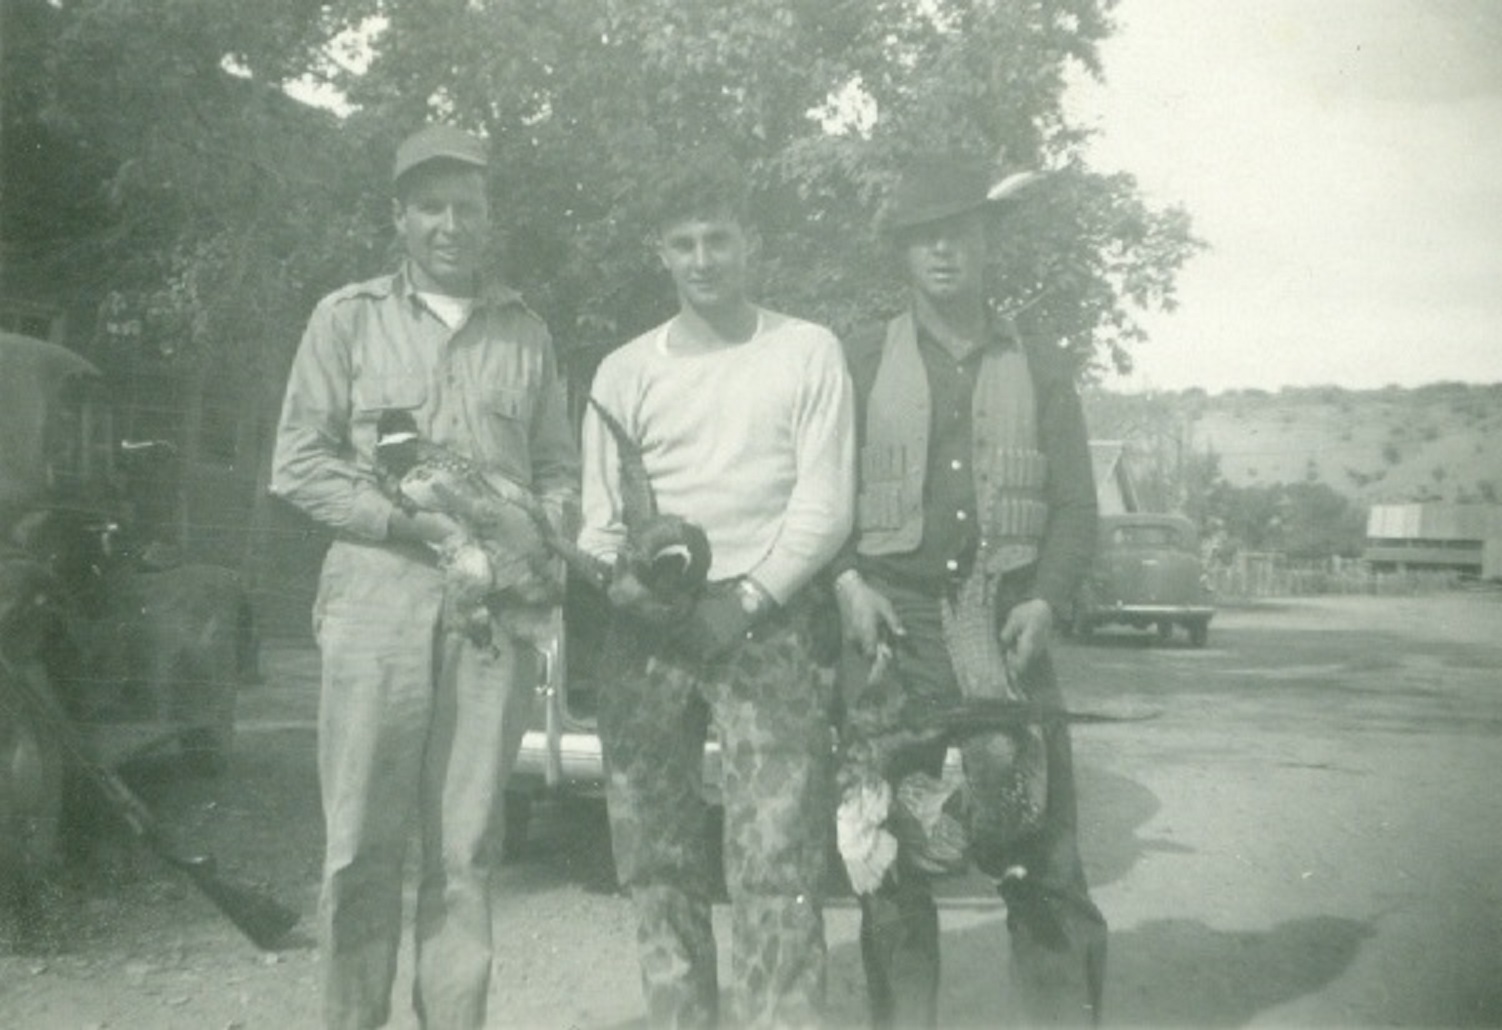 Arlo Hafen, Victor Frei, and Landon Frei after hunting pheasants